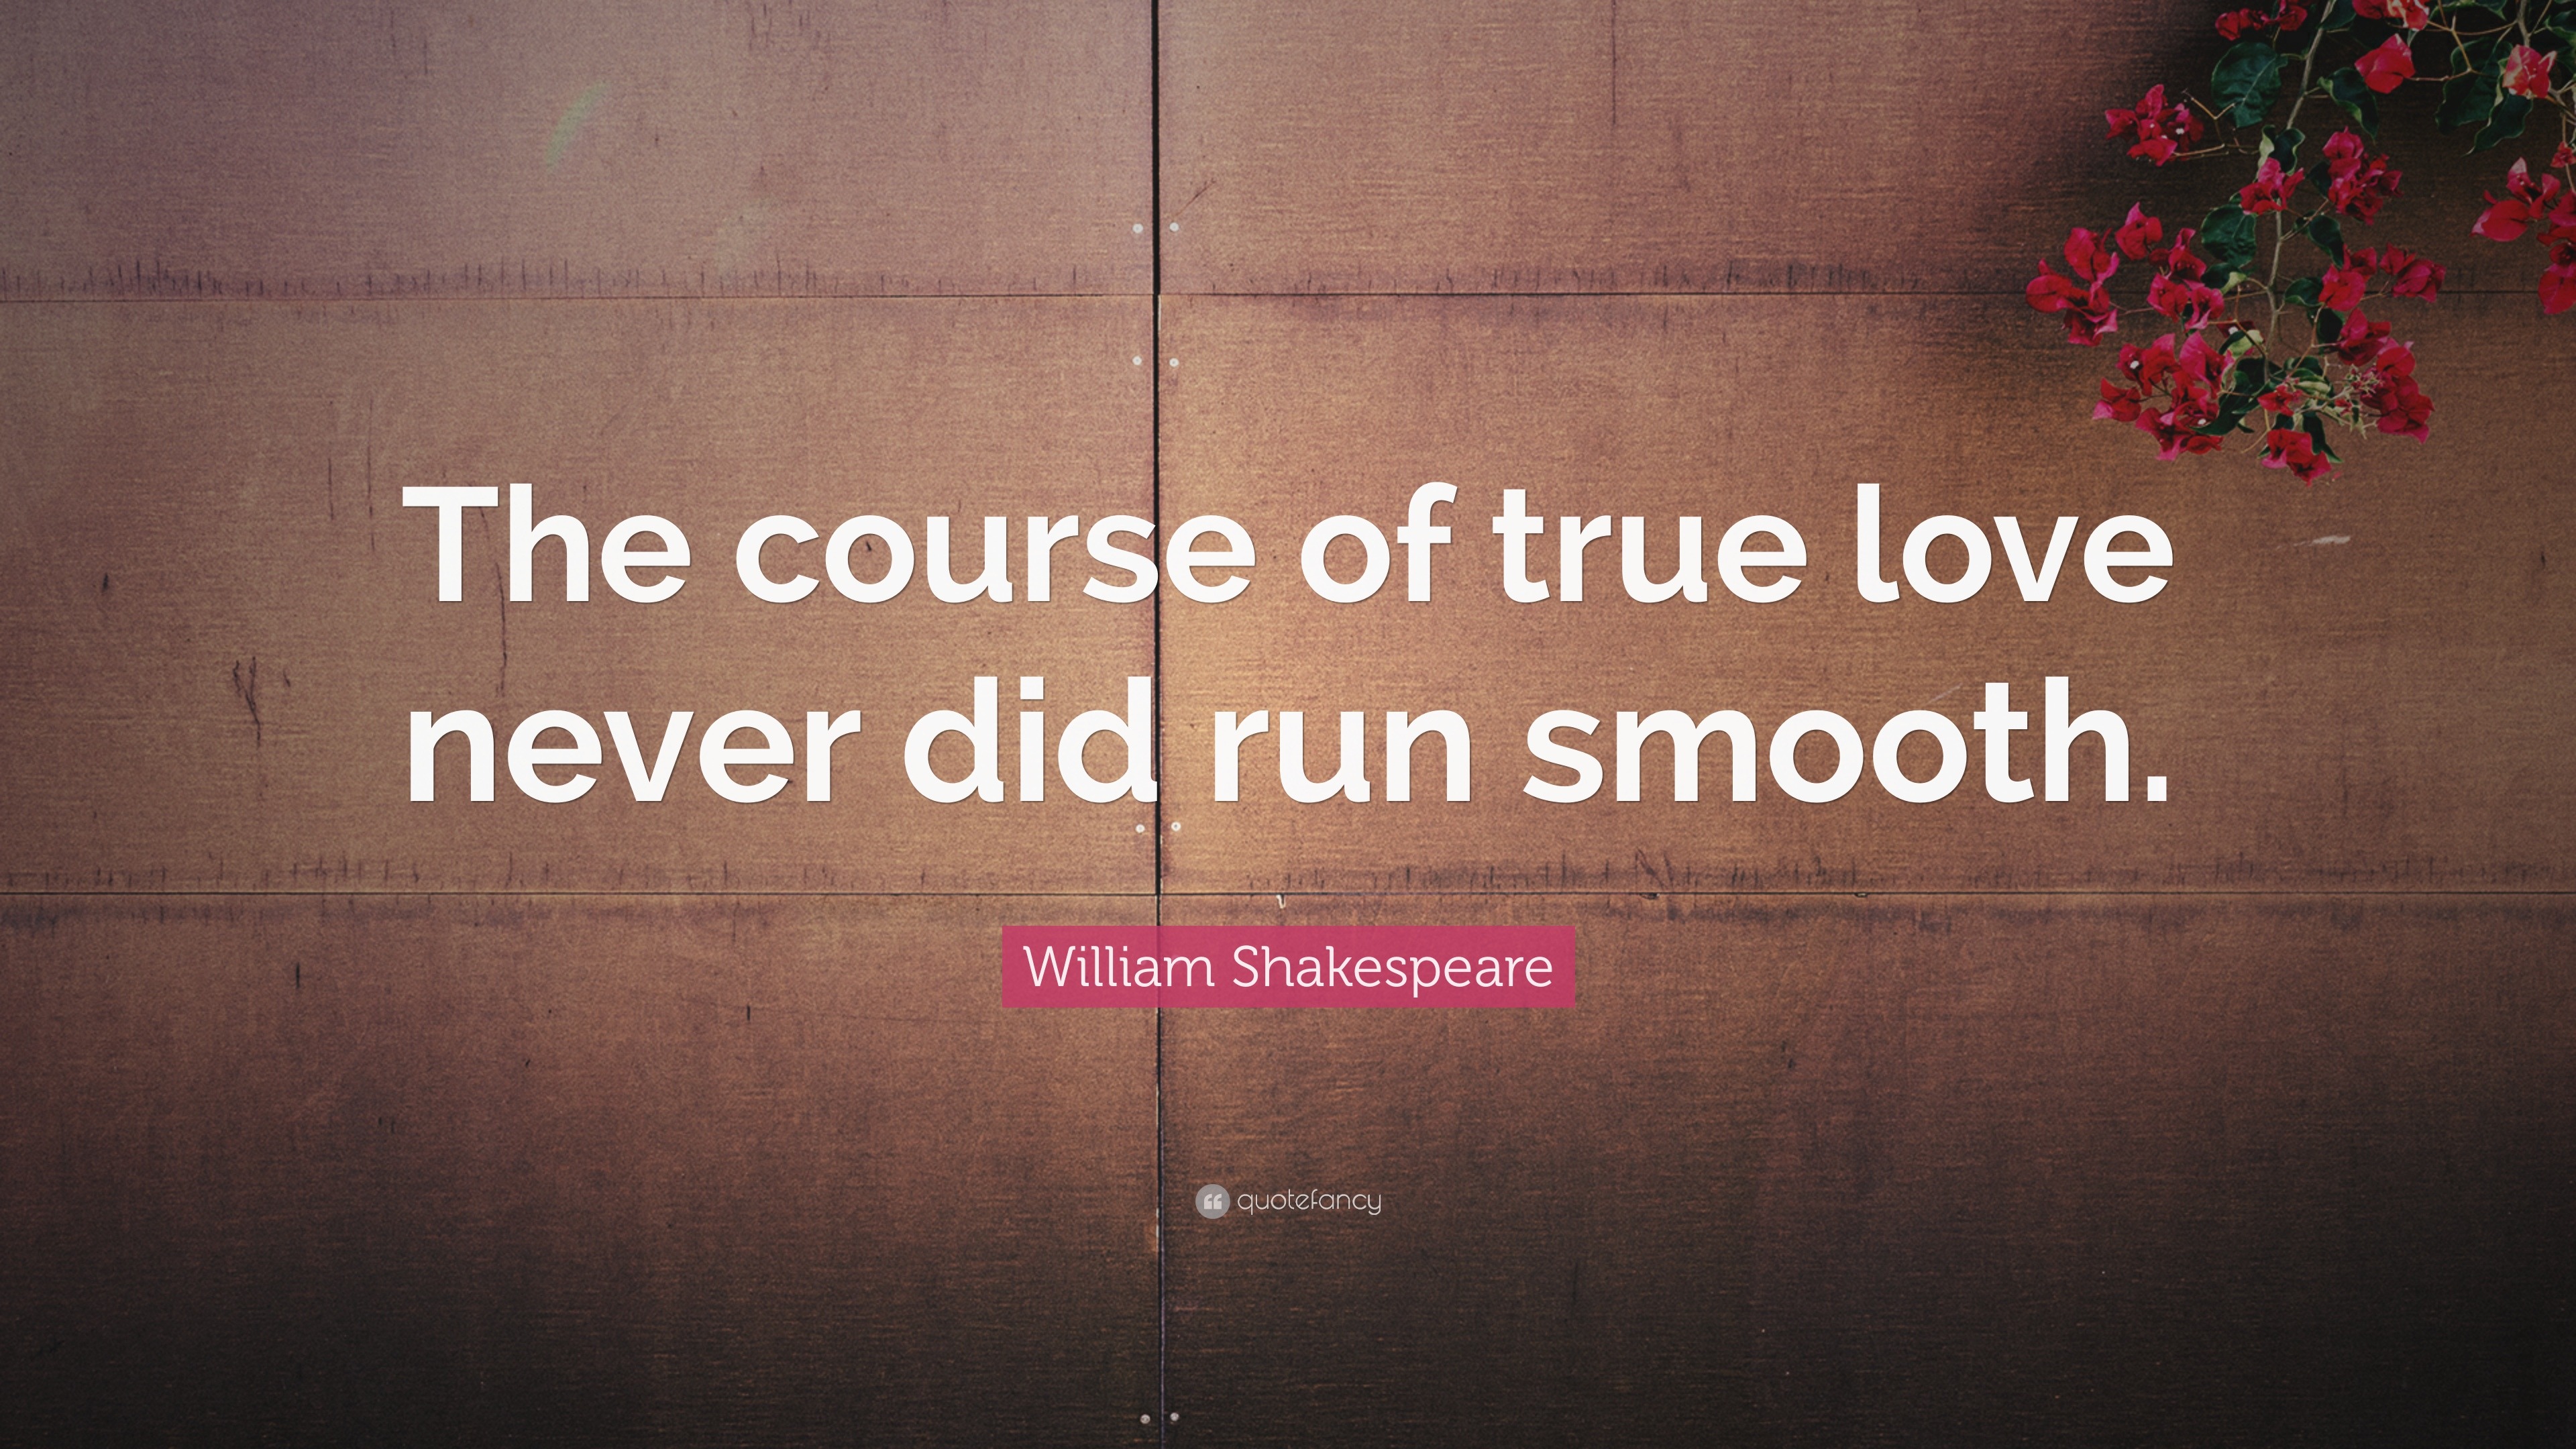 William Shakespeare Quote “The course of true love never did run smooth ”